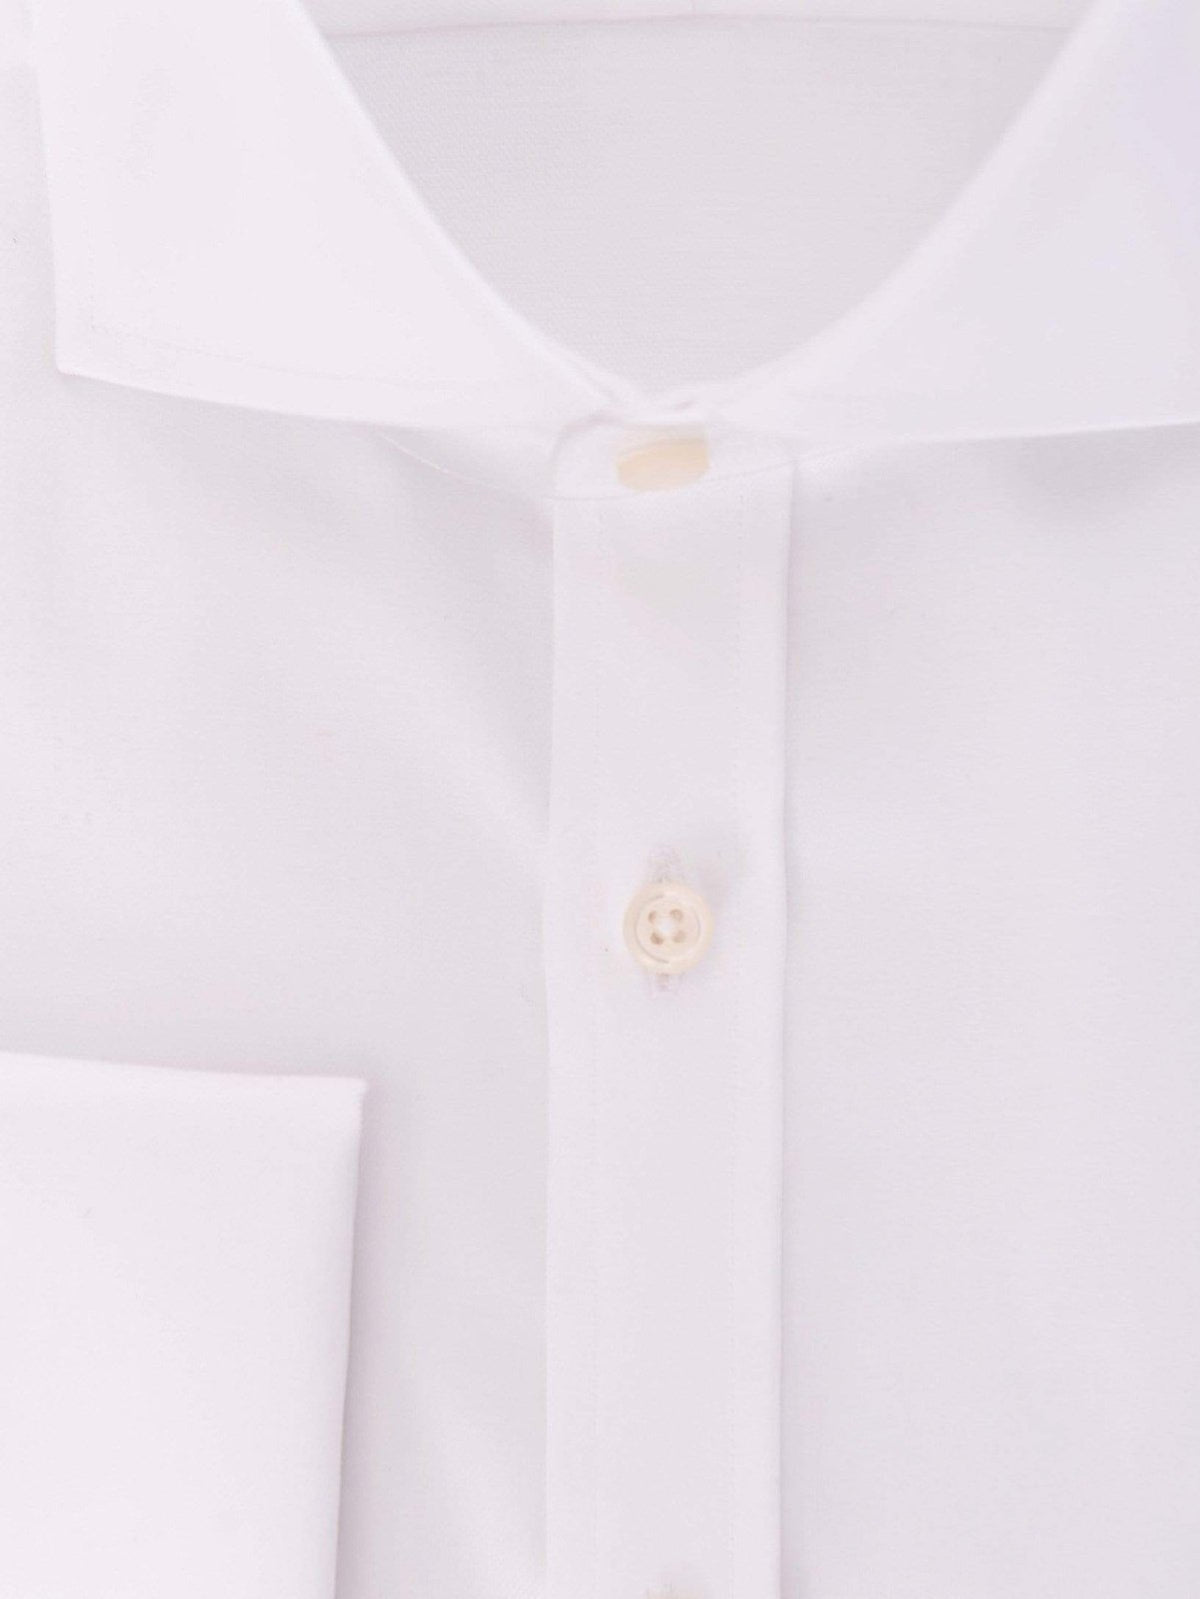 Christopher Morris SHIRTS Mens Extra Slim Fit Solid White Twill Spread Collar Non Iron Cotton Dress Shirt